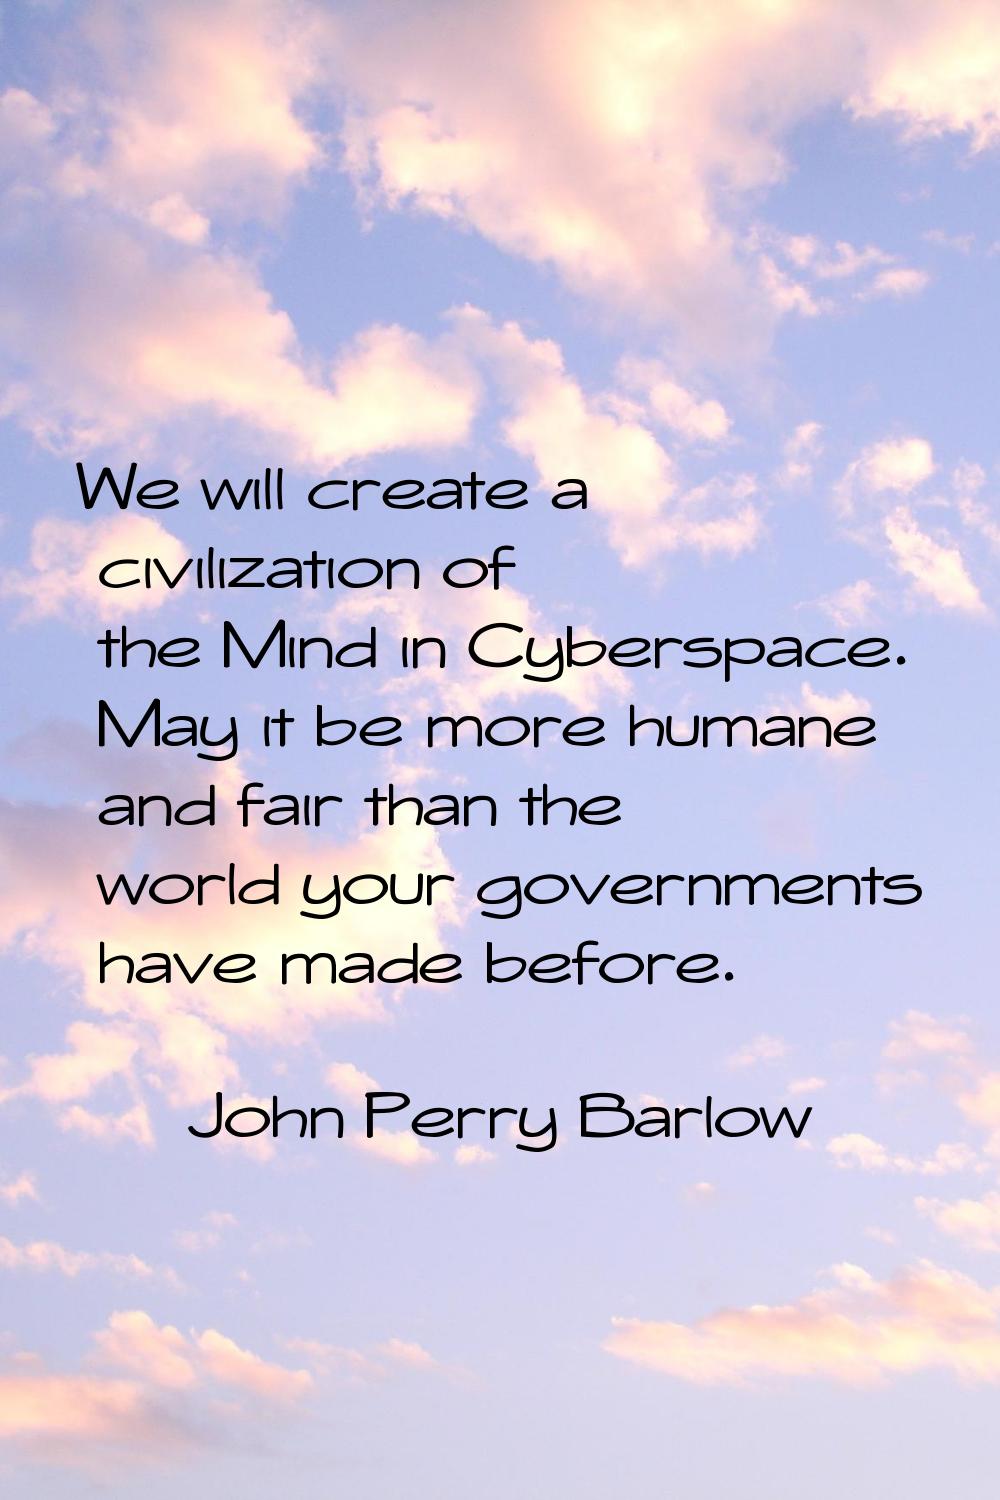 We will create a civilization of the Mind in Cyberspace. May it be more humane and fair than the wo